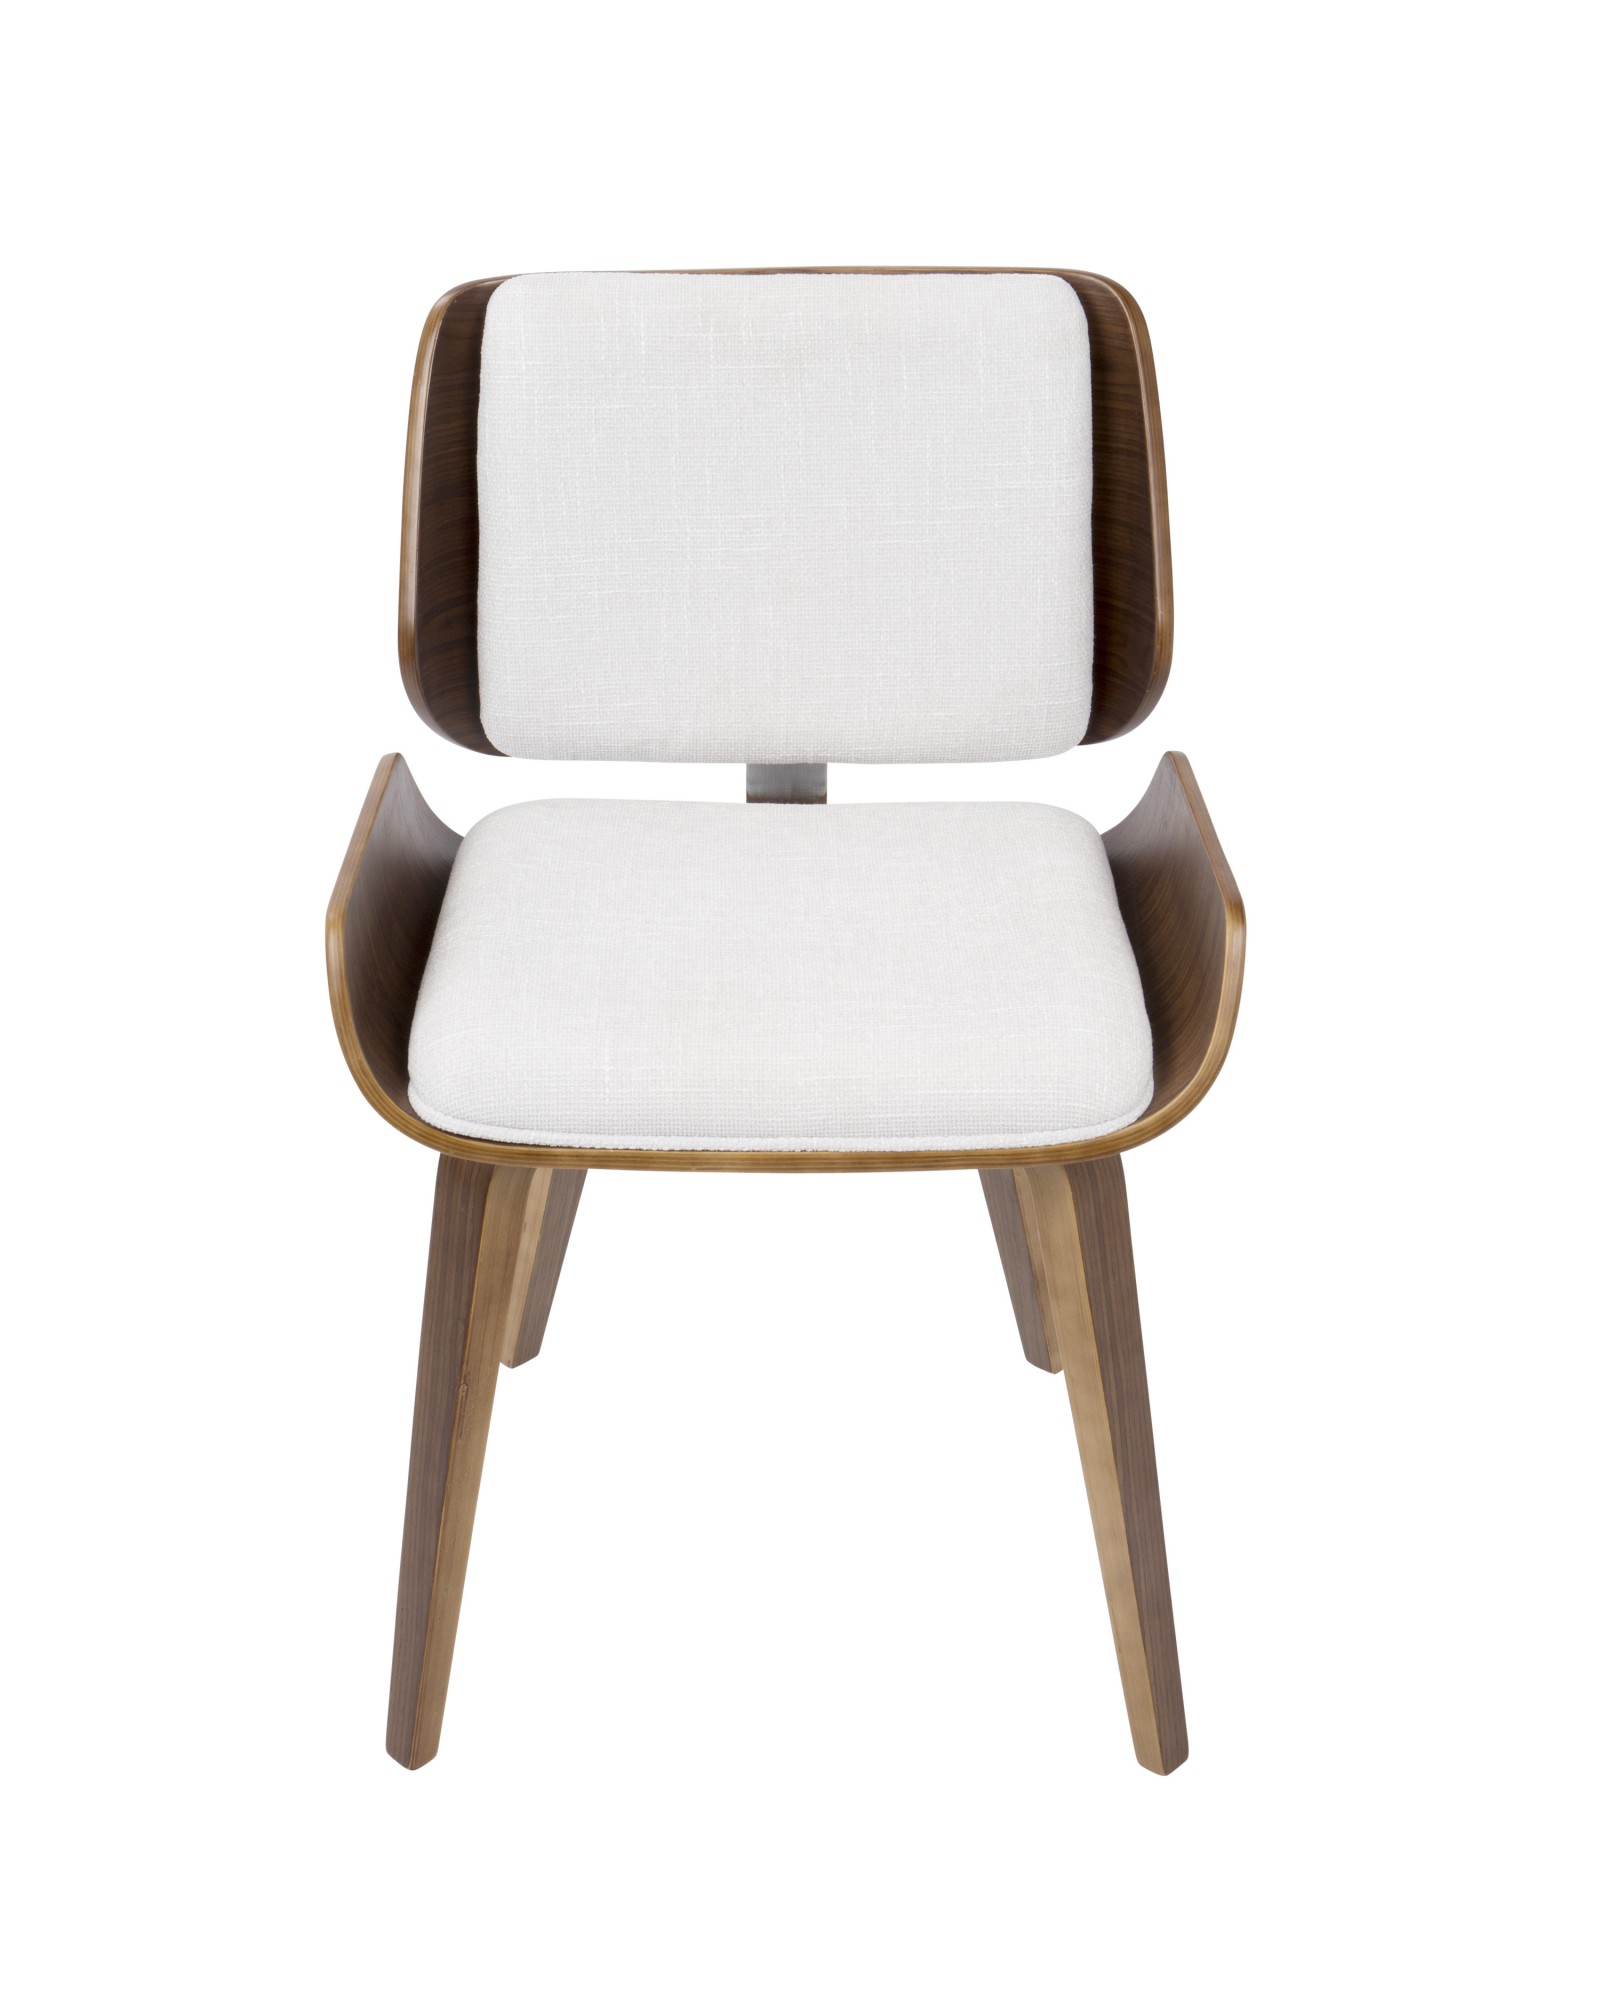 Santi Mid-Century Modern Dining/Accent Chair in Walnut with Light Grey Fabric - Set of 2